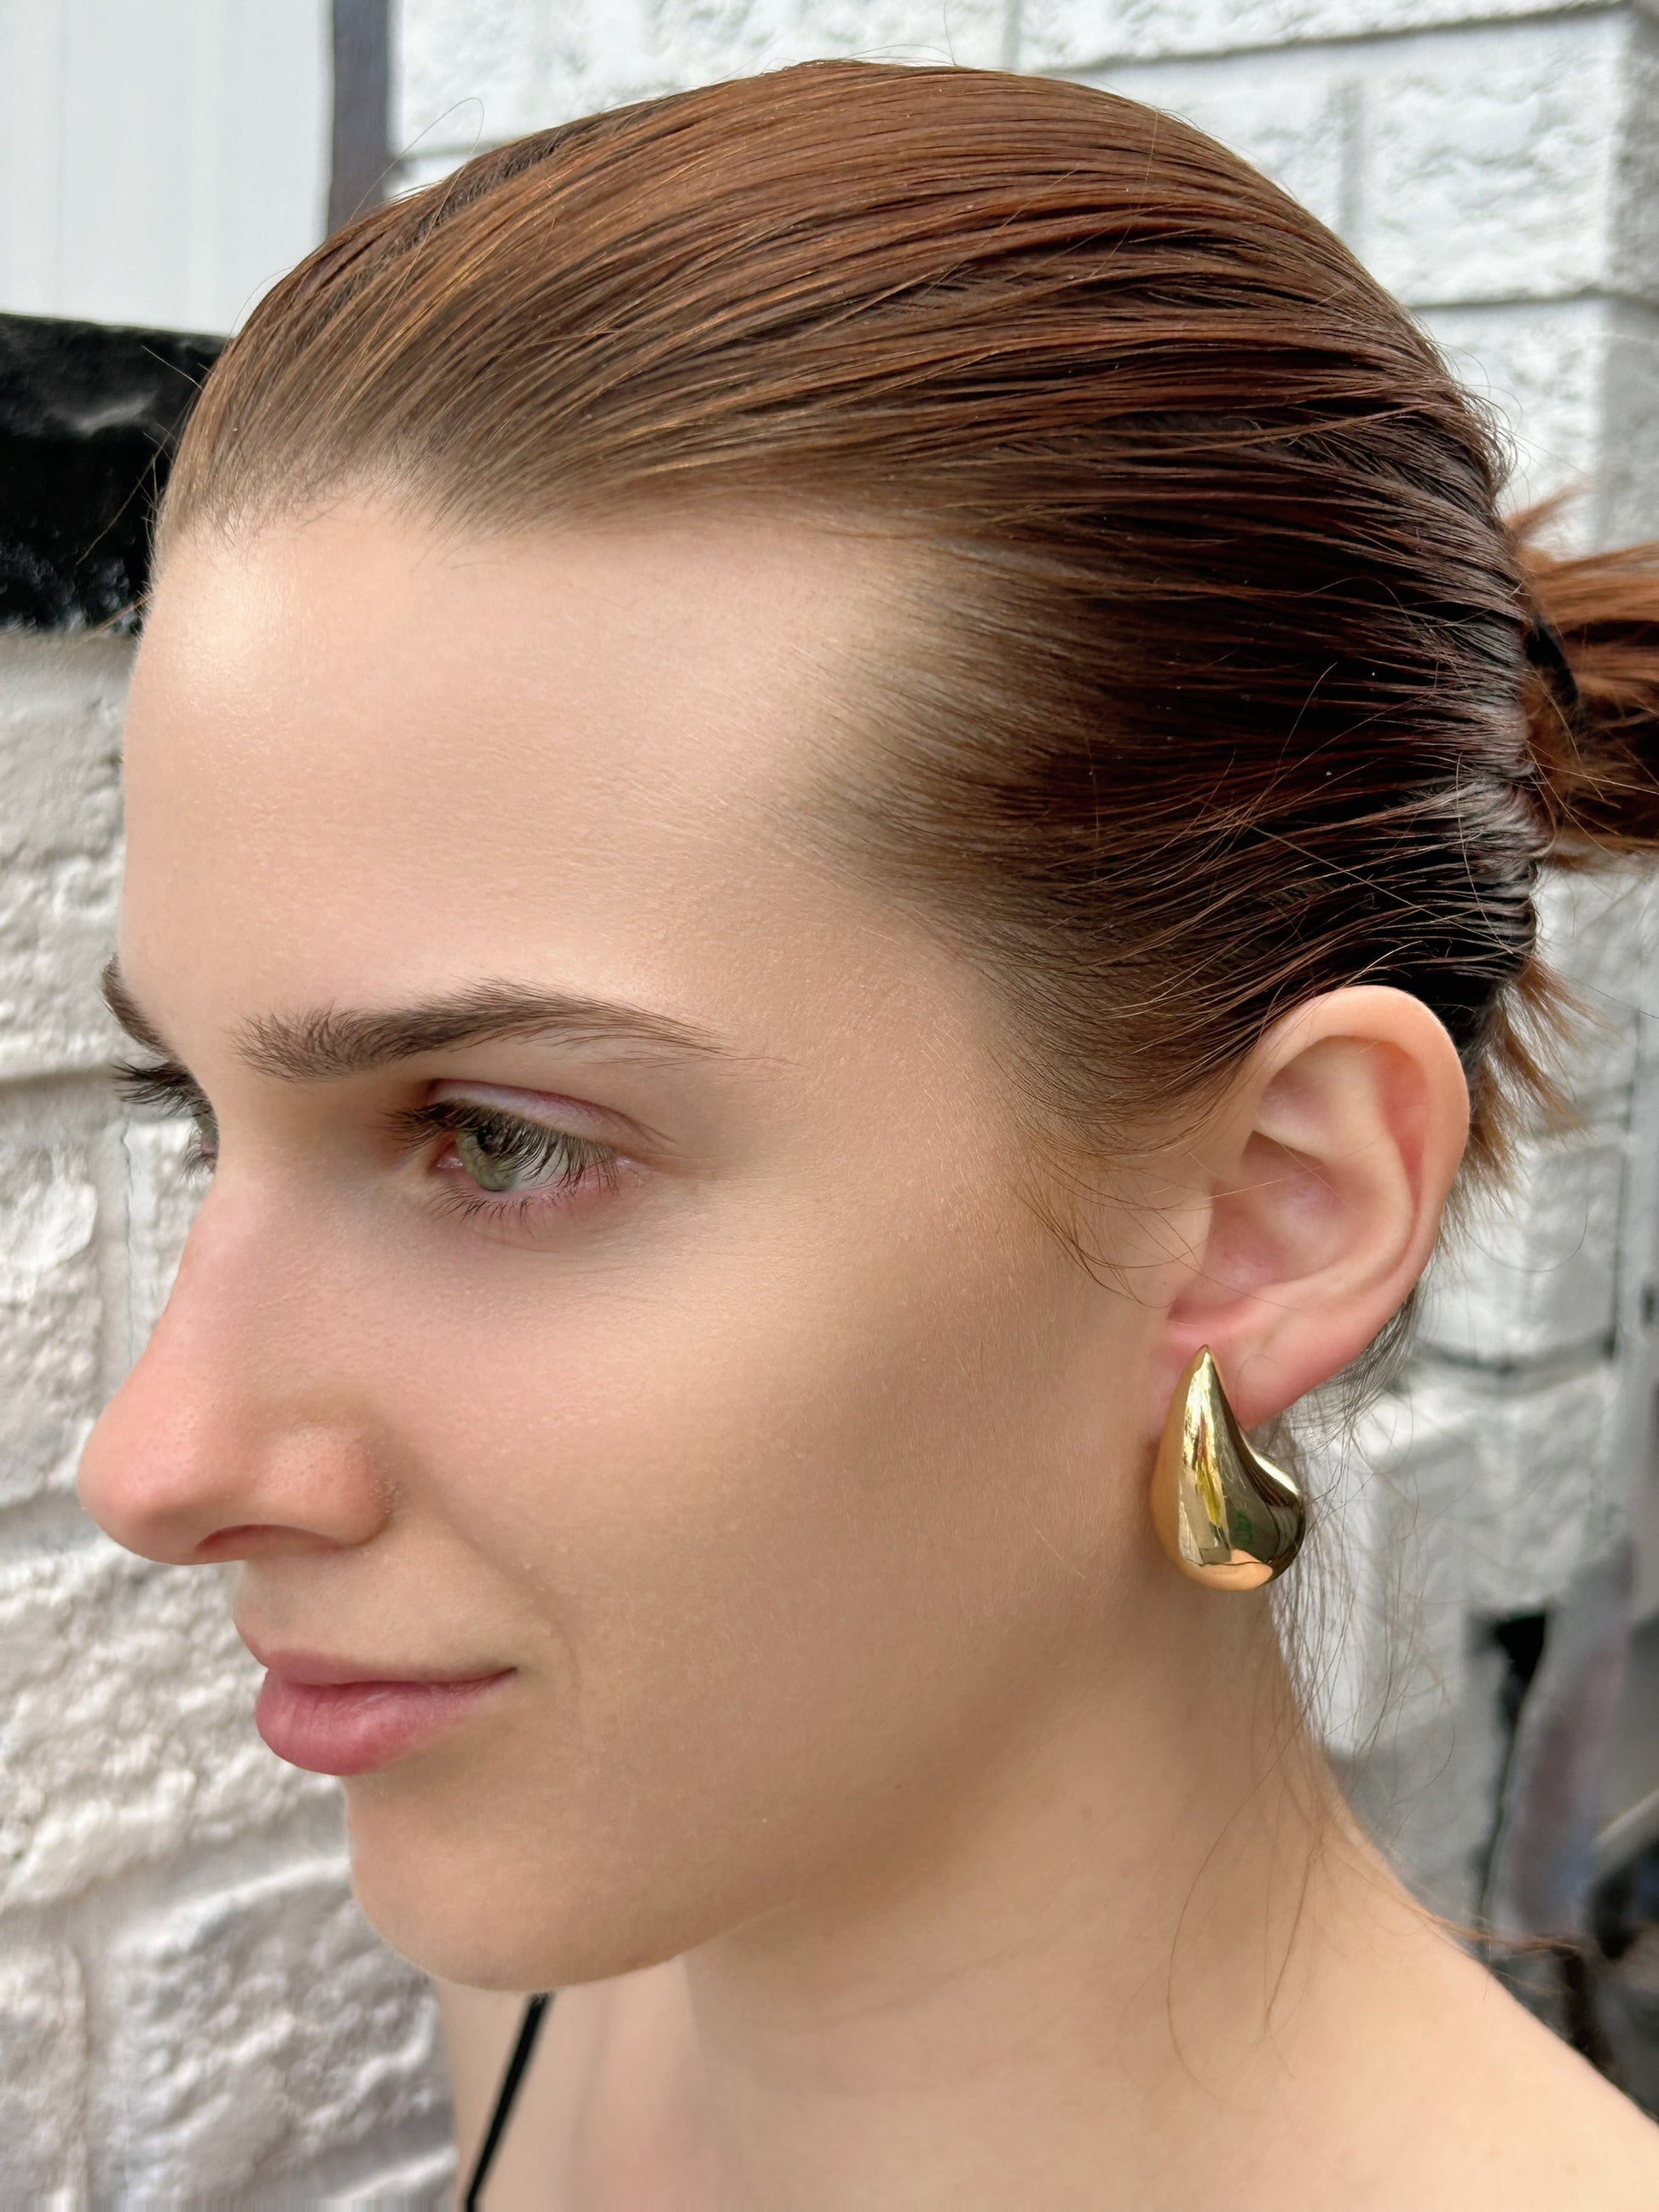 Fashion earrings in gold or silver.   Love the style. A must have earrings.